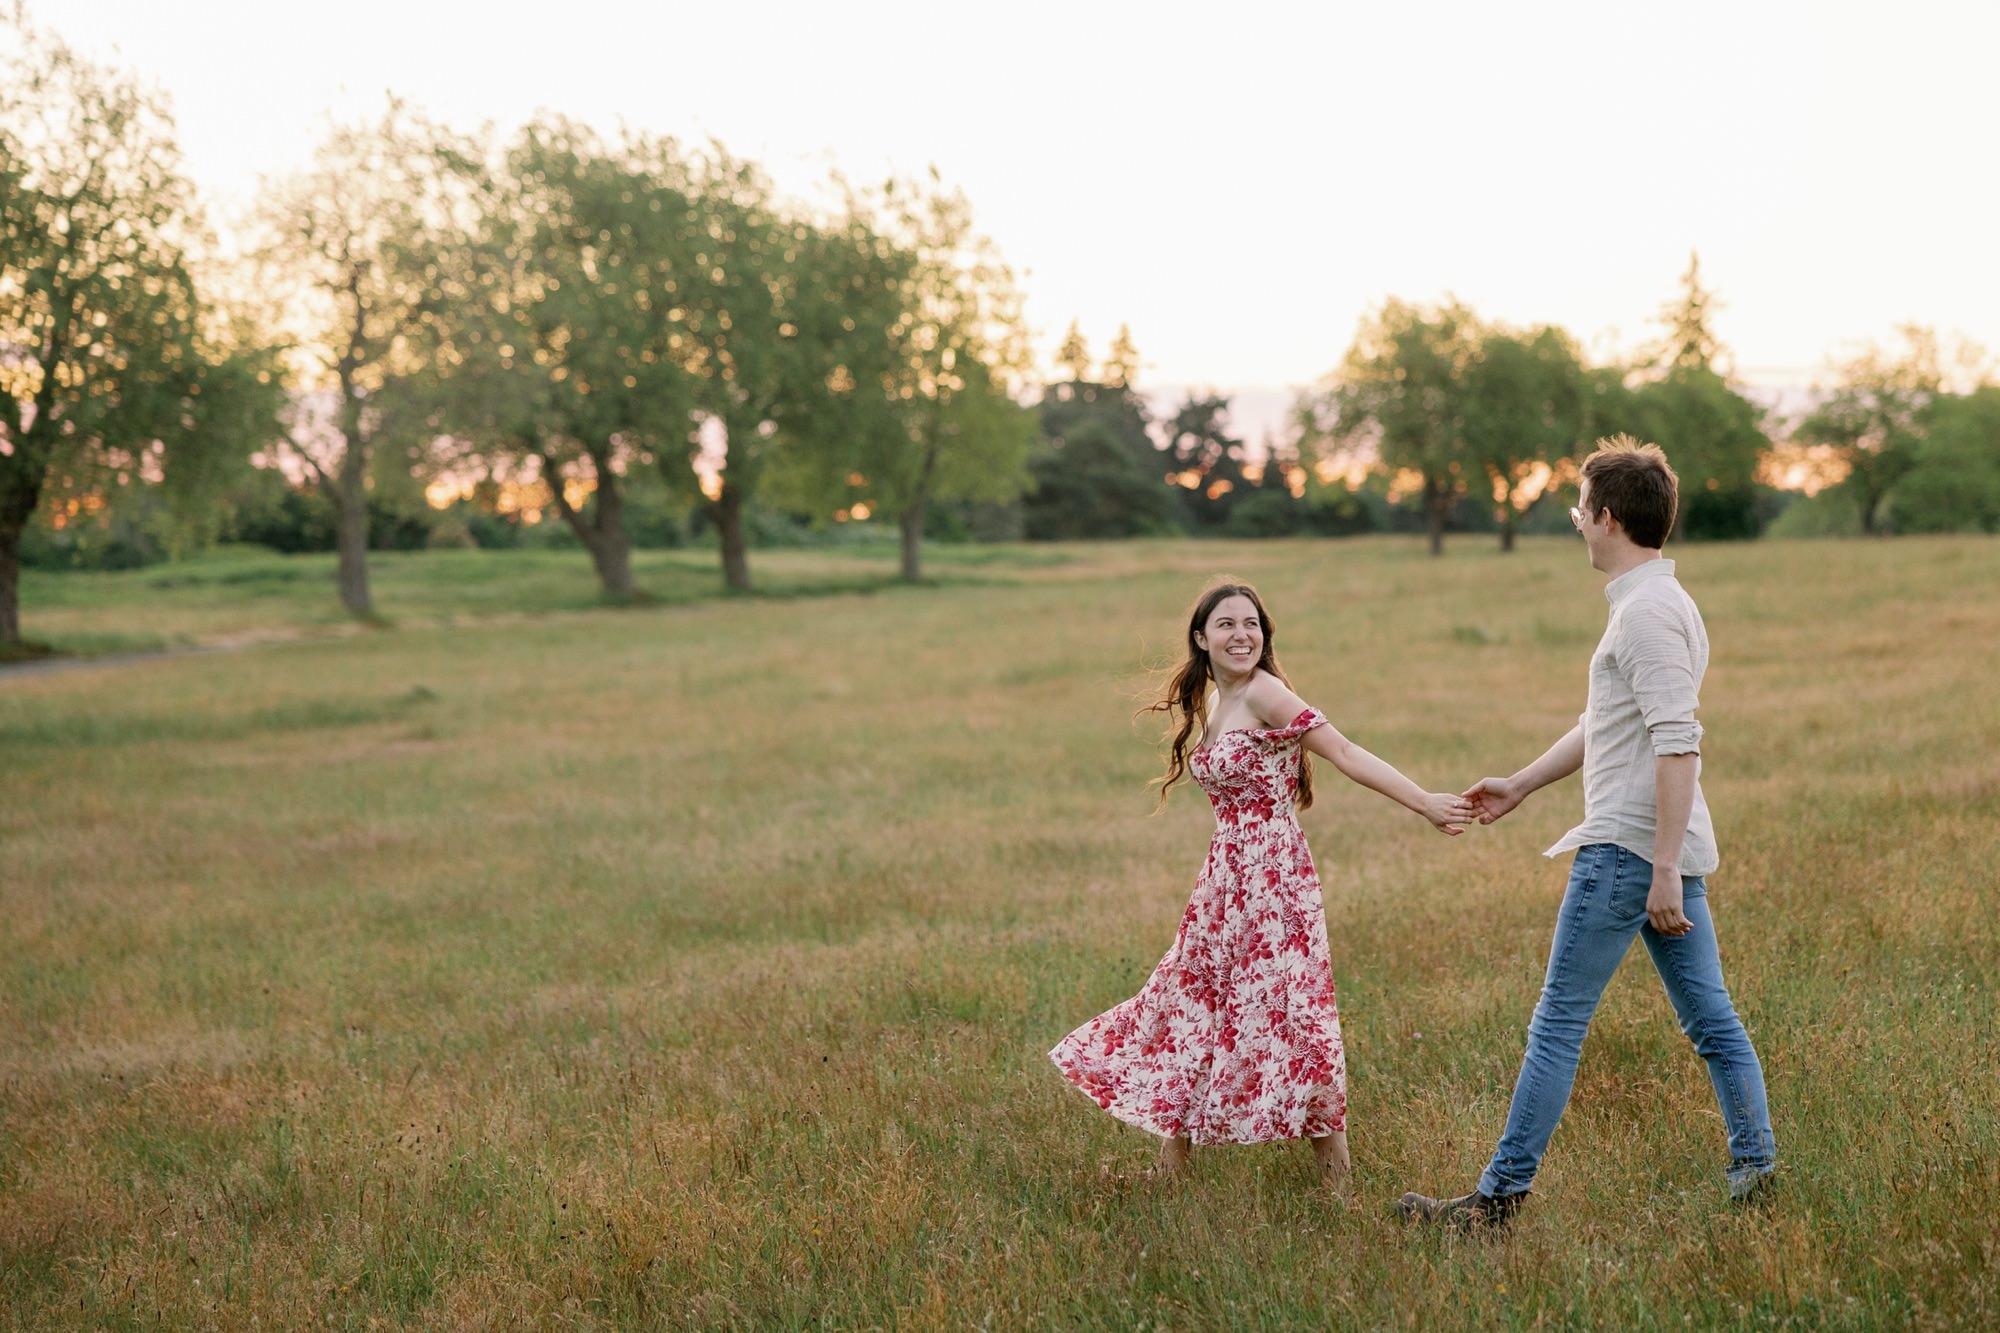 A couple holding hands and smiling in a wide-open field, with the woman in a floral dress and the man in a light shirt.